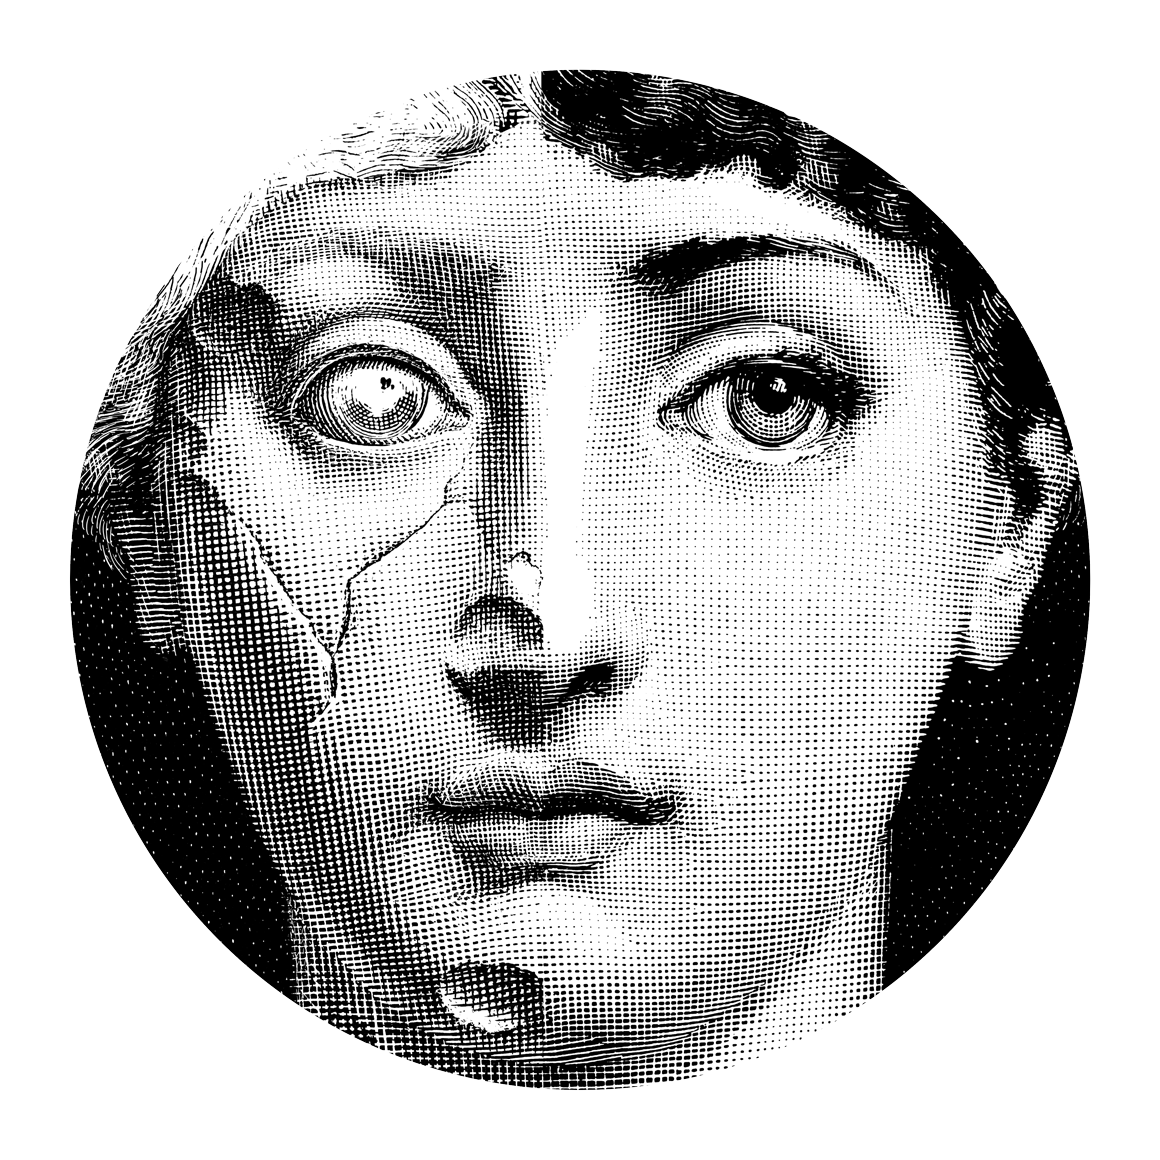 https://www.fornasetti.com/on/demandware.static/-/Sites-fornasetti-Library/default/dwf1c2d068/cloud/history/DSK_STORIA_GRIDHI_25.png